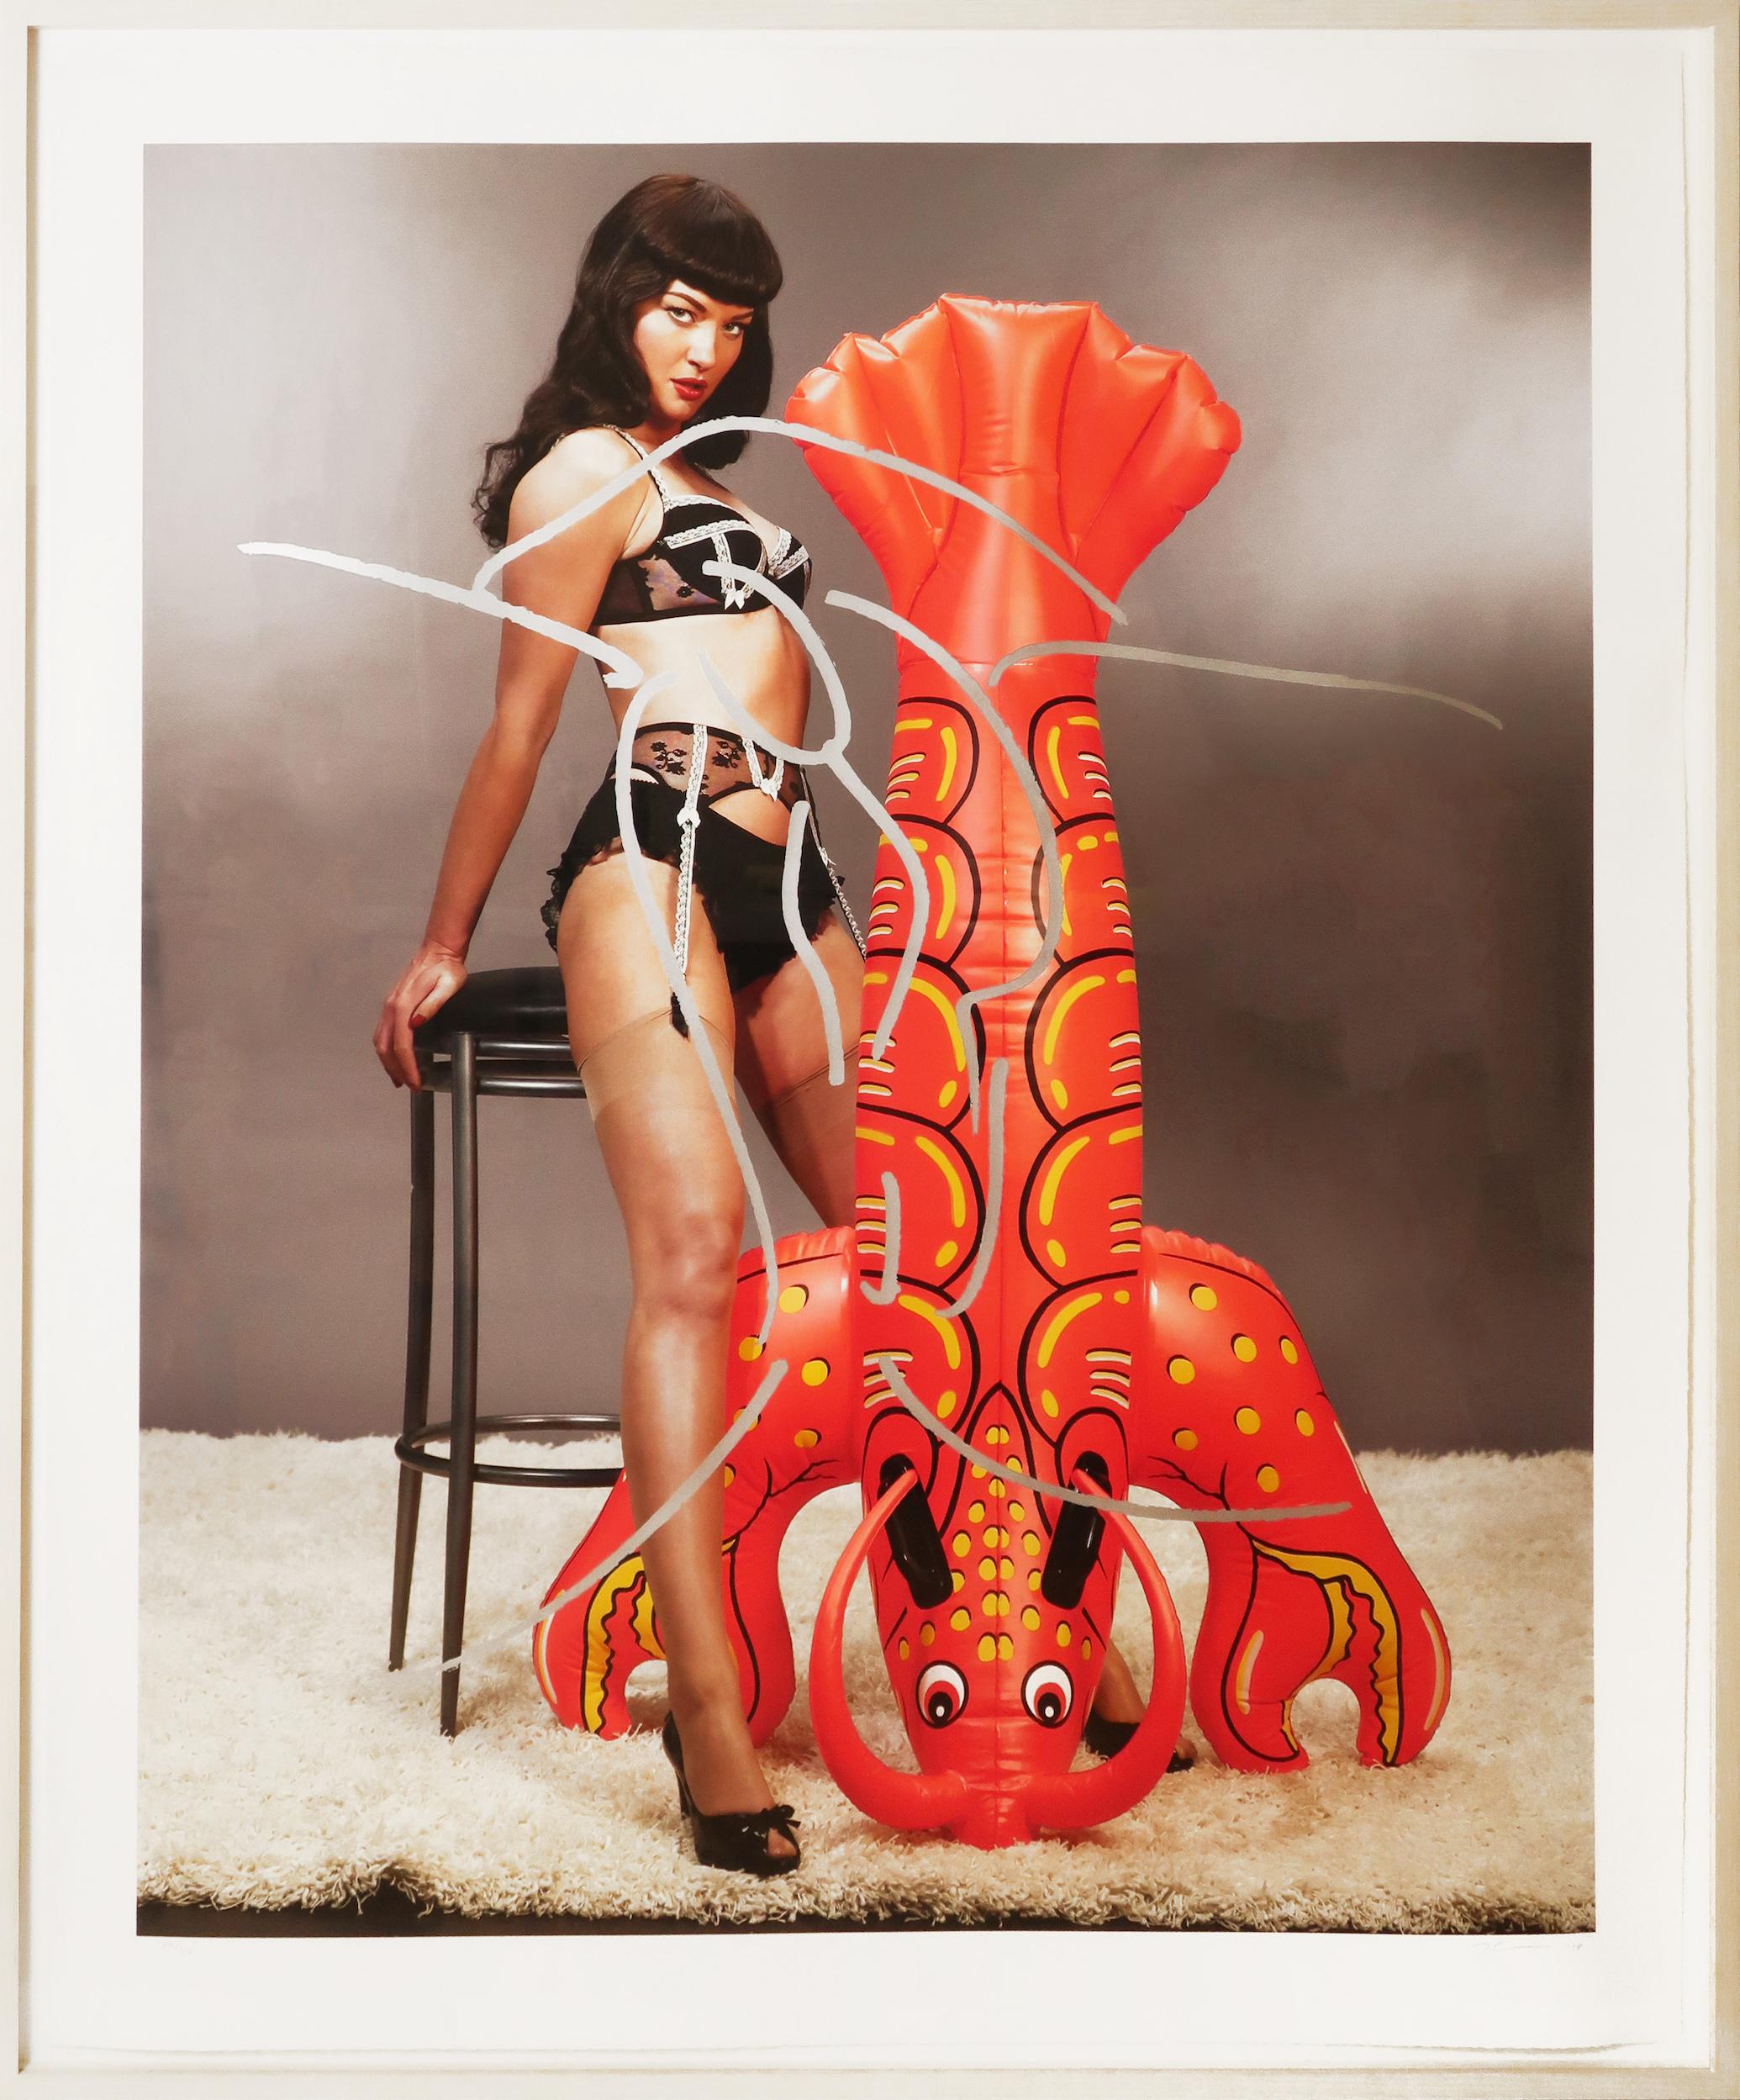 Girl with Lobster - Photograph by Jeff Koons